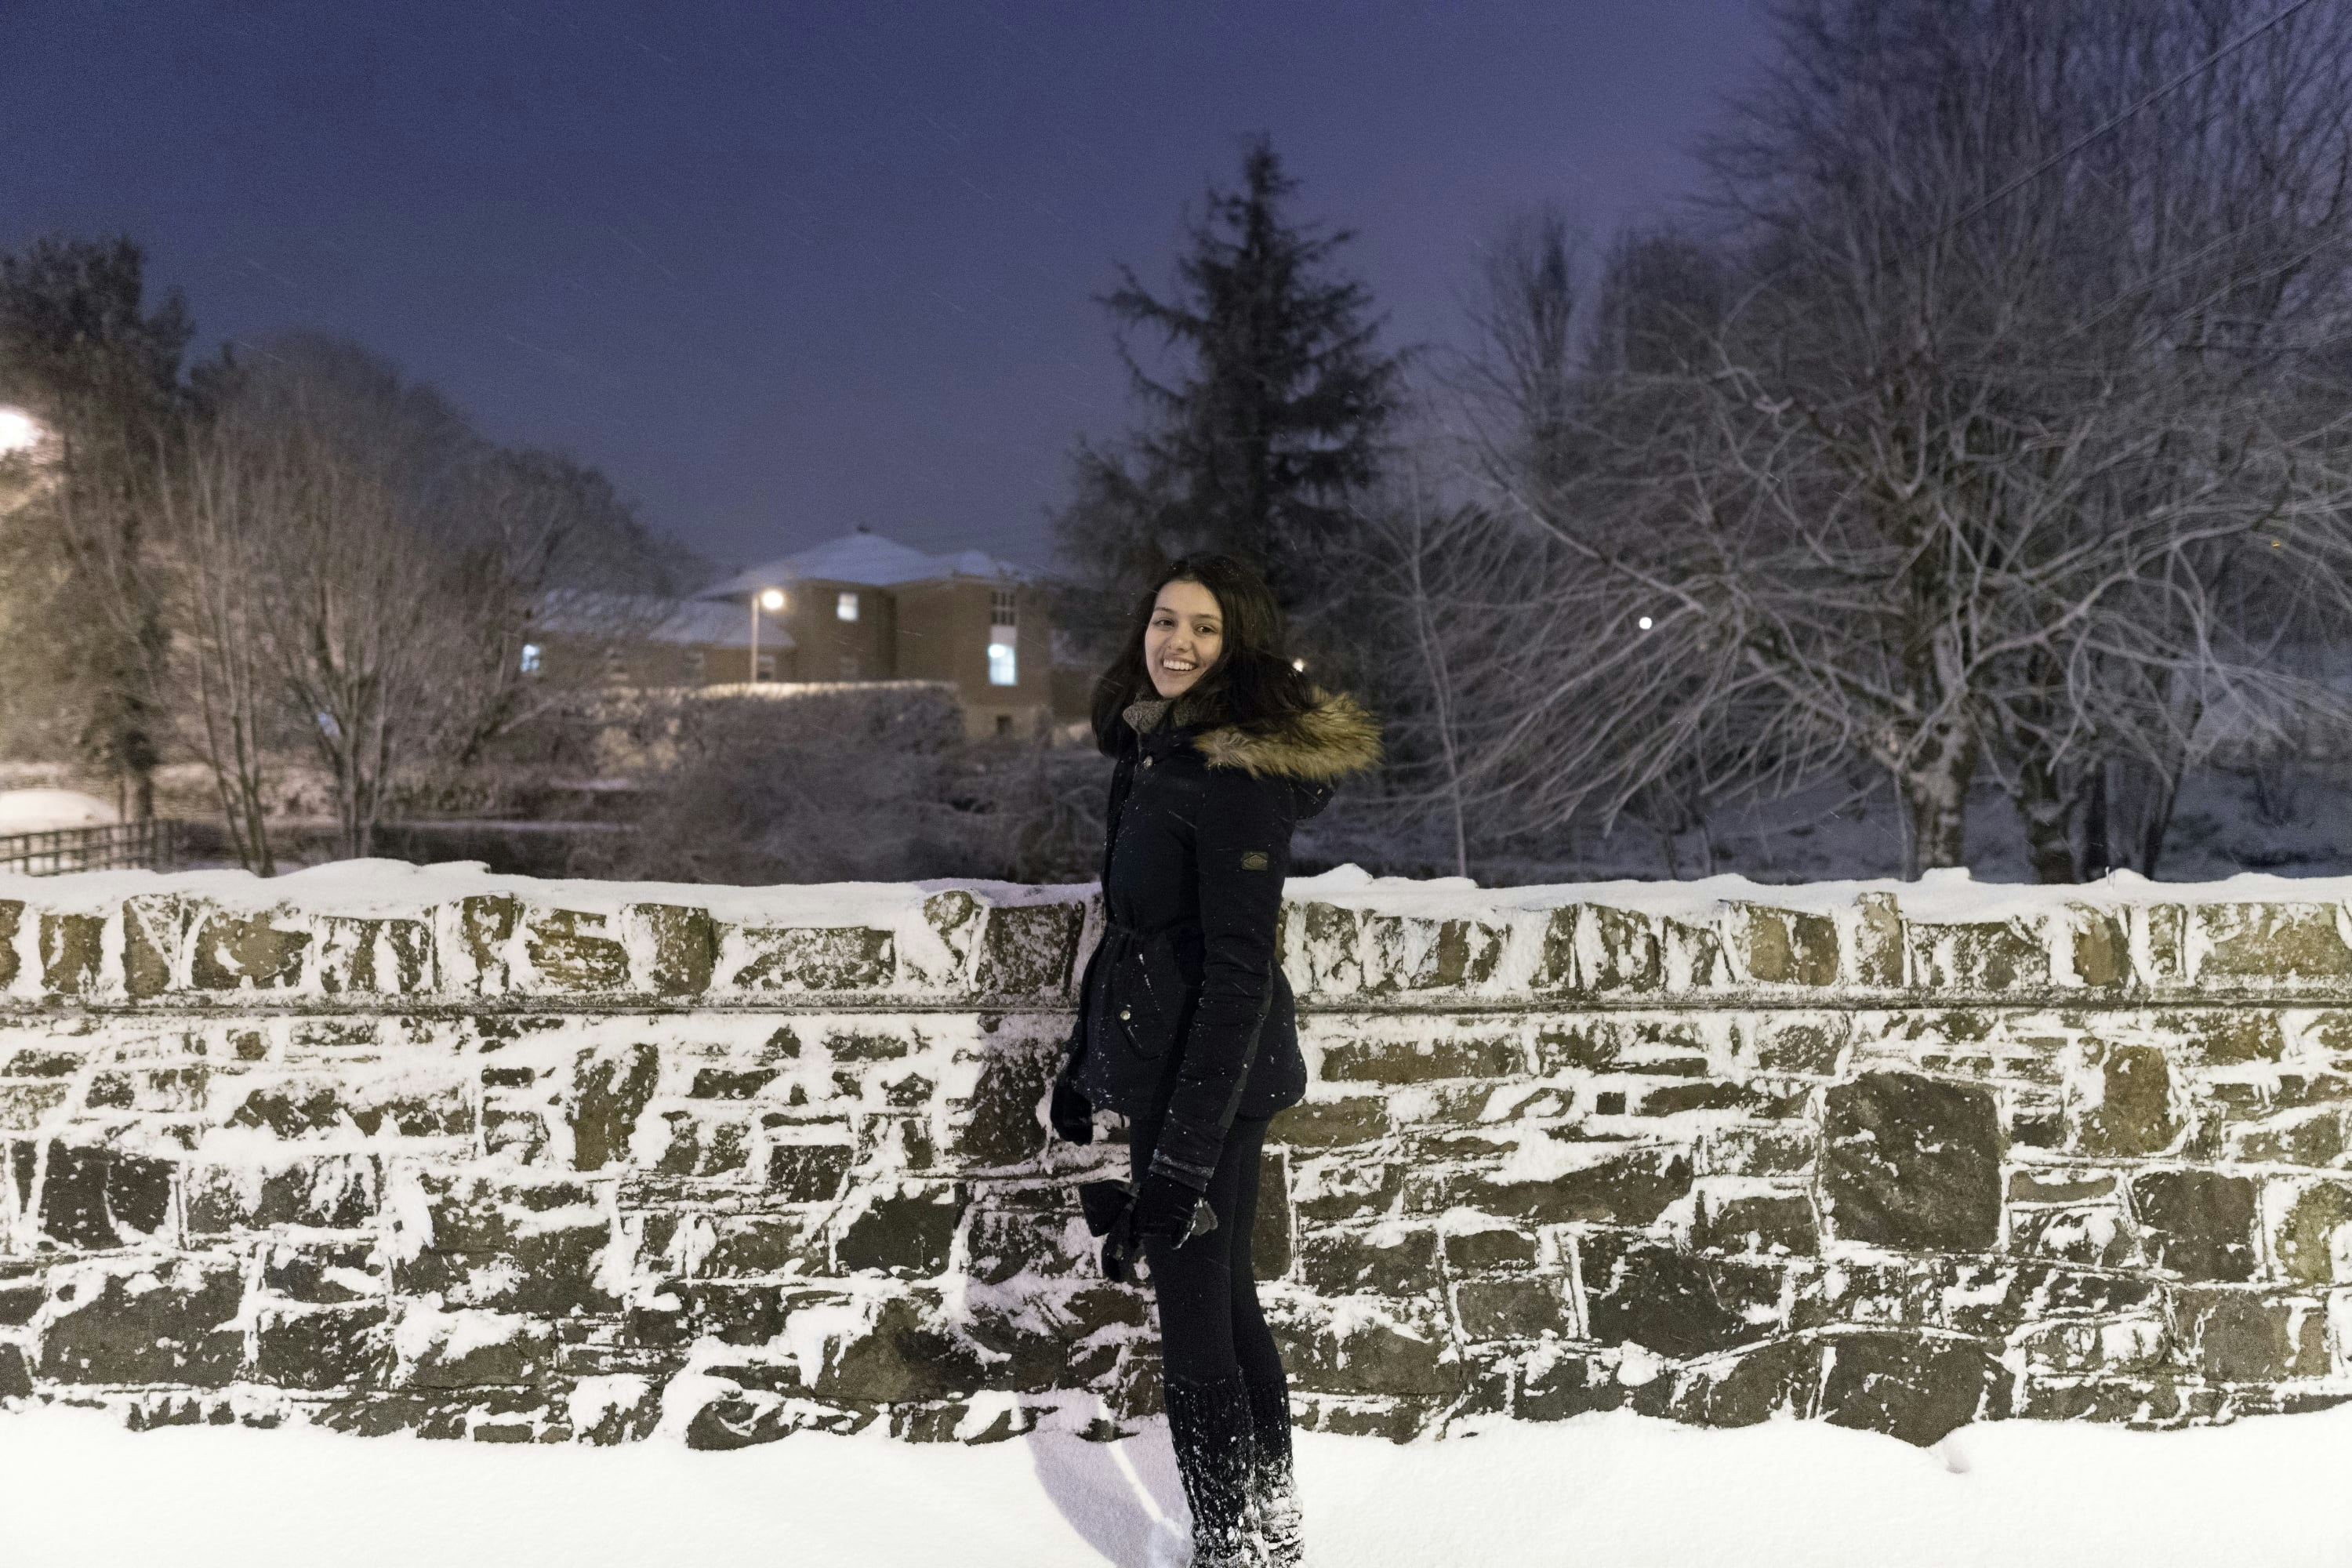 Laura in front of stone wall covered in snow